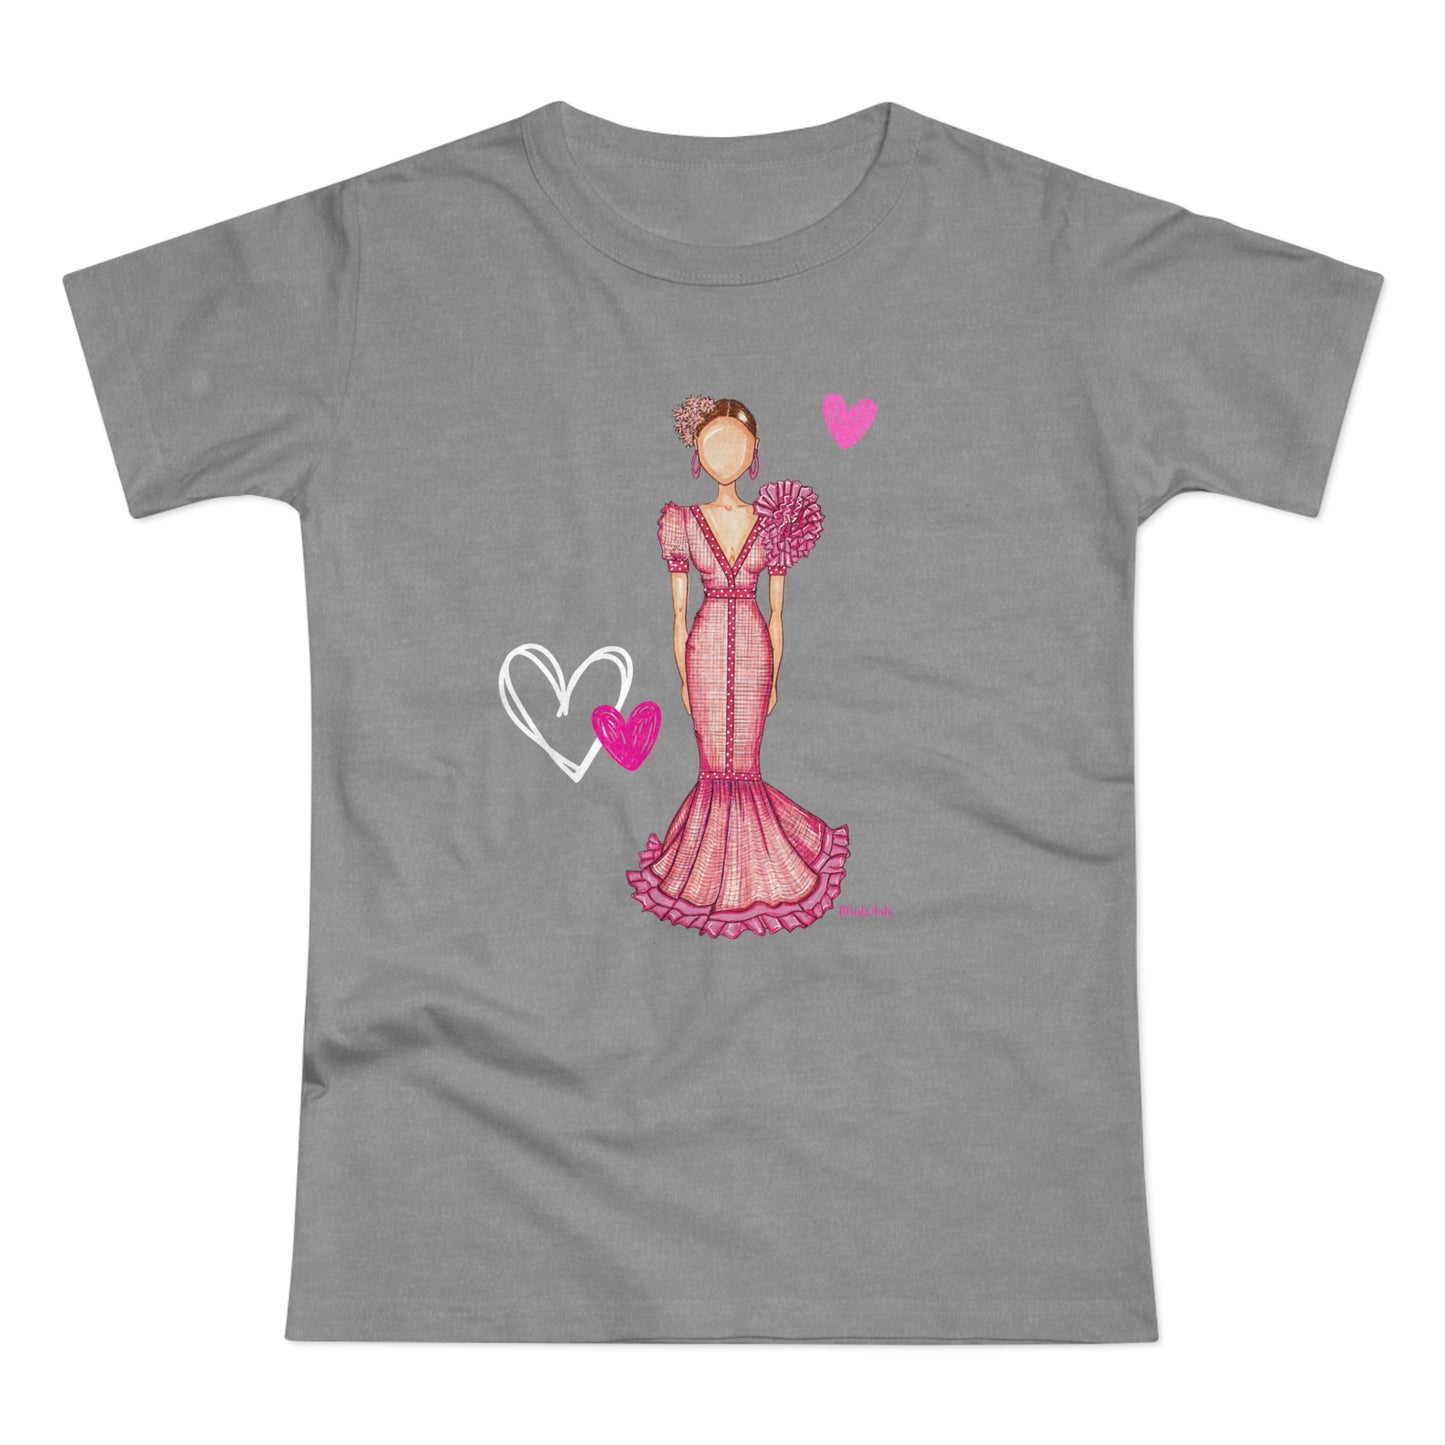 a women's t - shirt with a woman in a pink dress